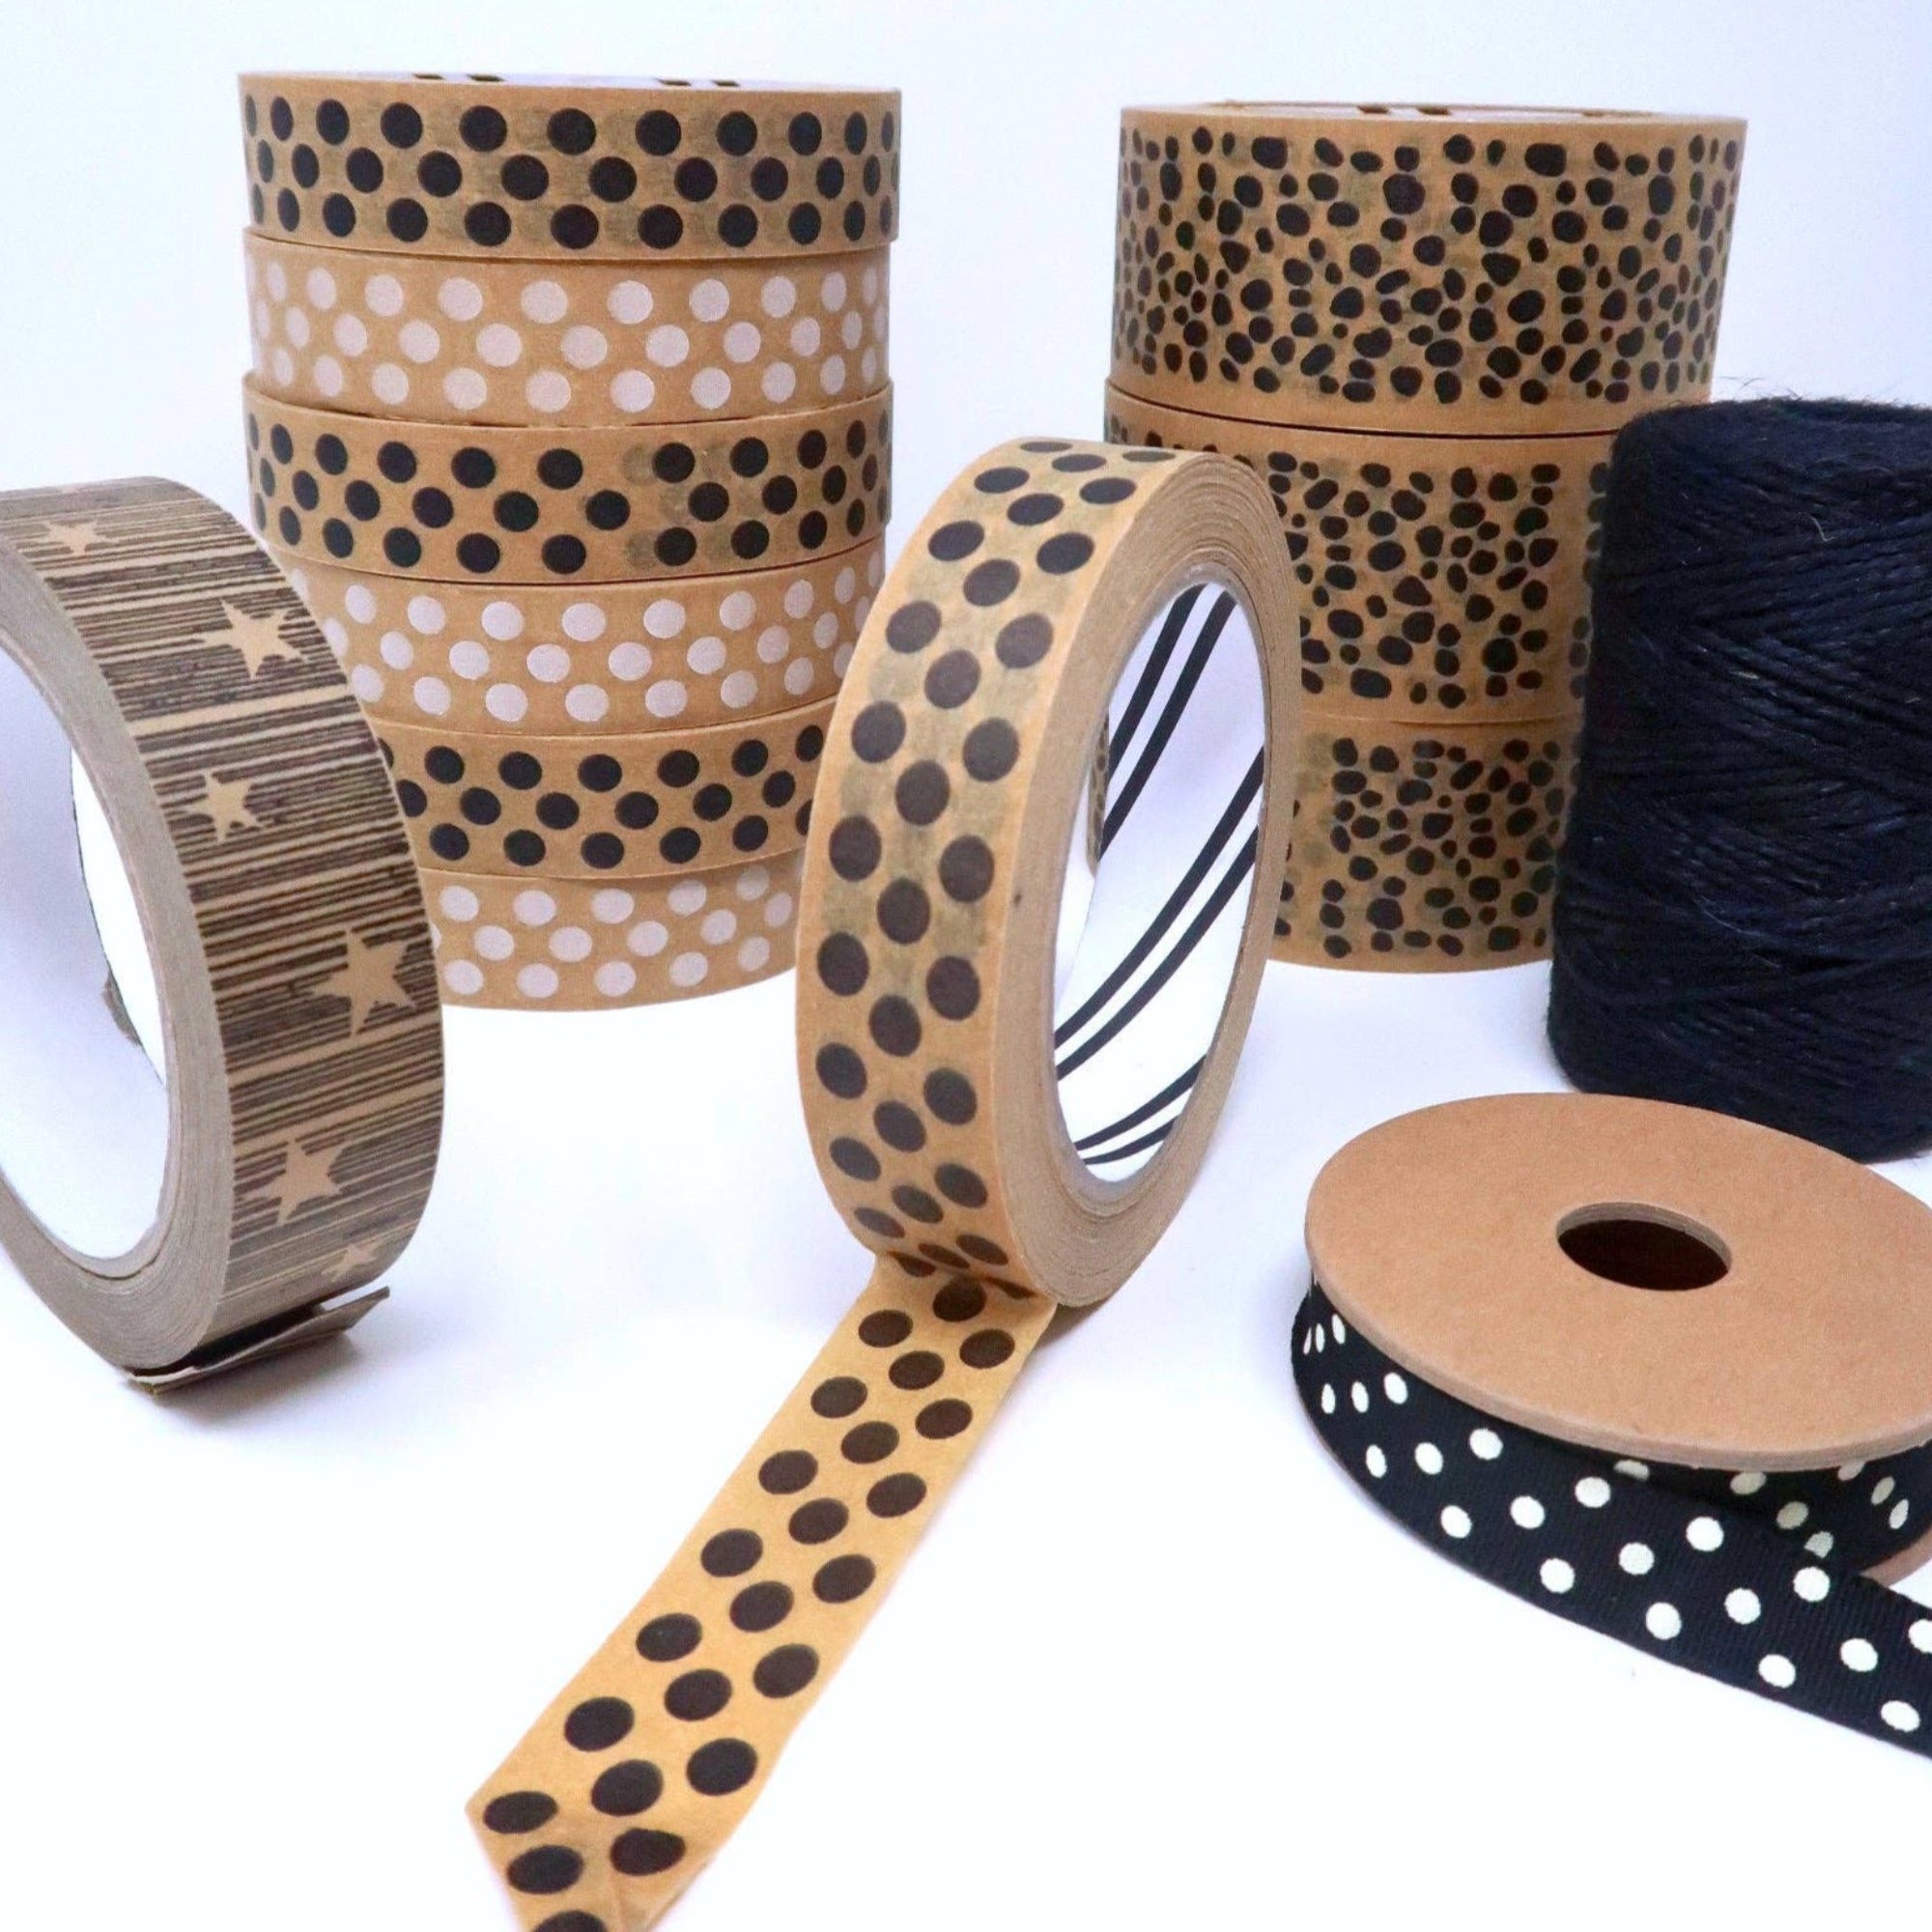 Black Polka dot printed brown paper packaging tape eco friendly and fully recyclable